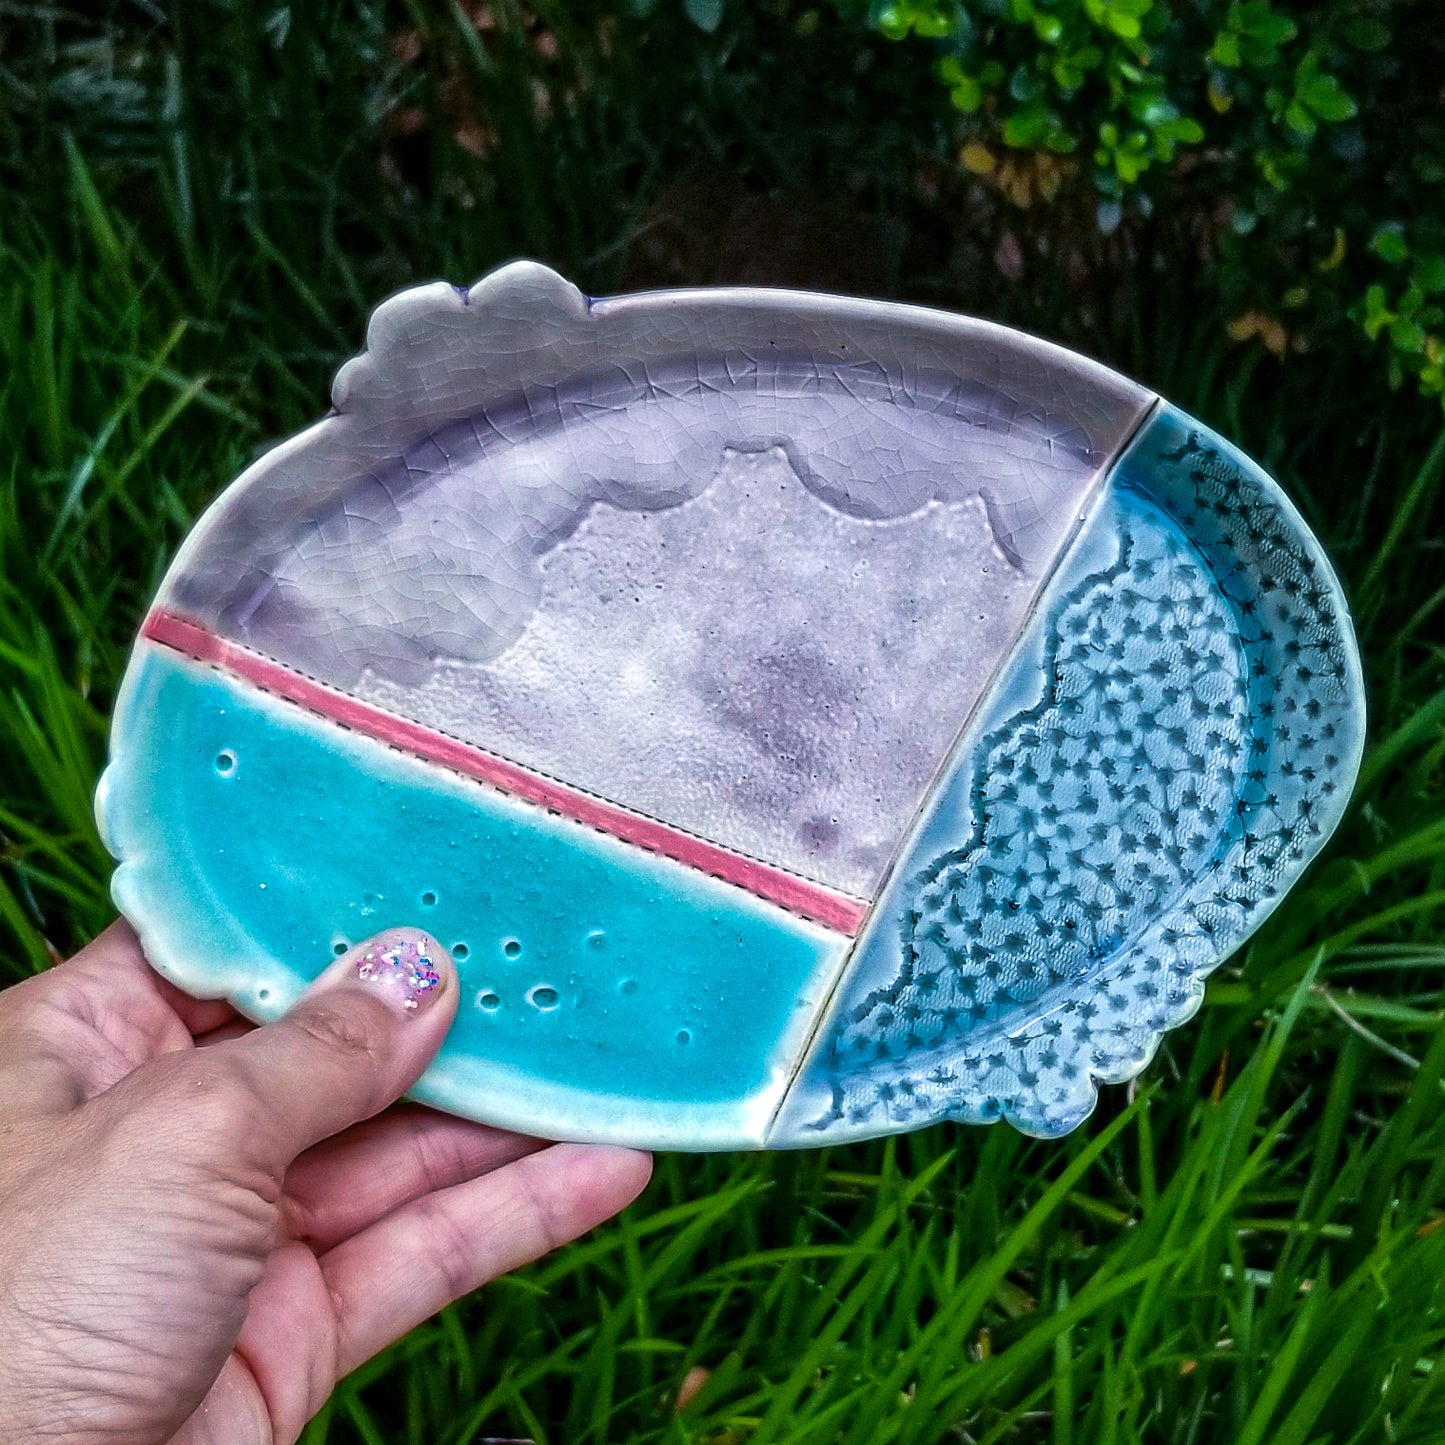 Handmade porcelain ceramic soda fired oval tray dish multi color with pressed textures